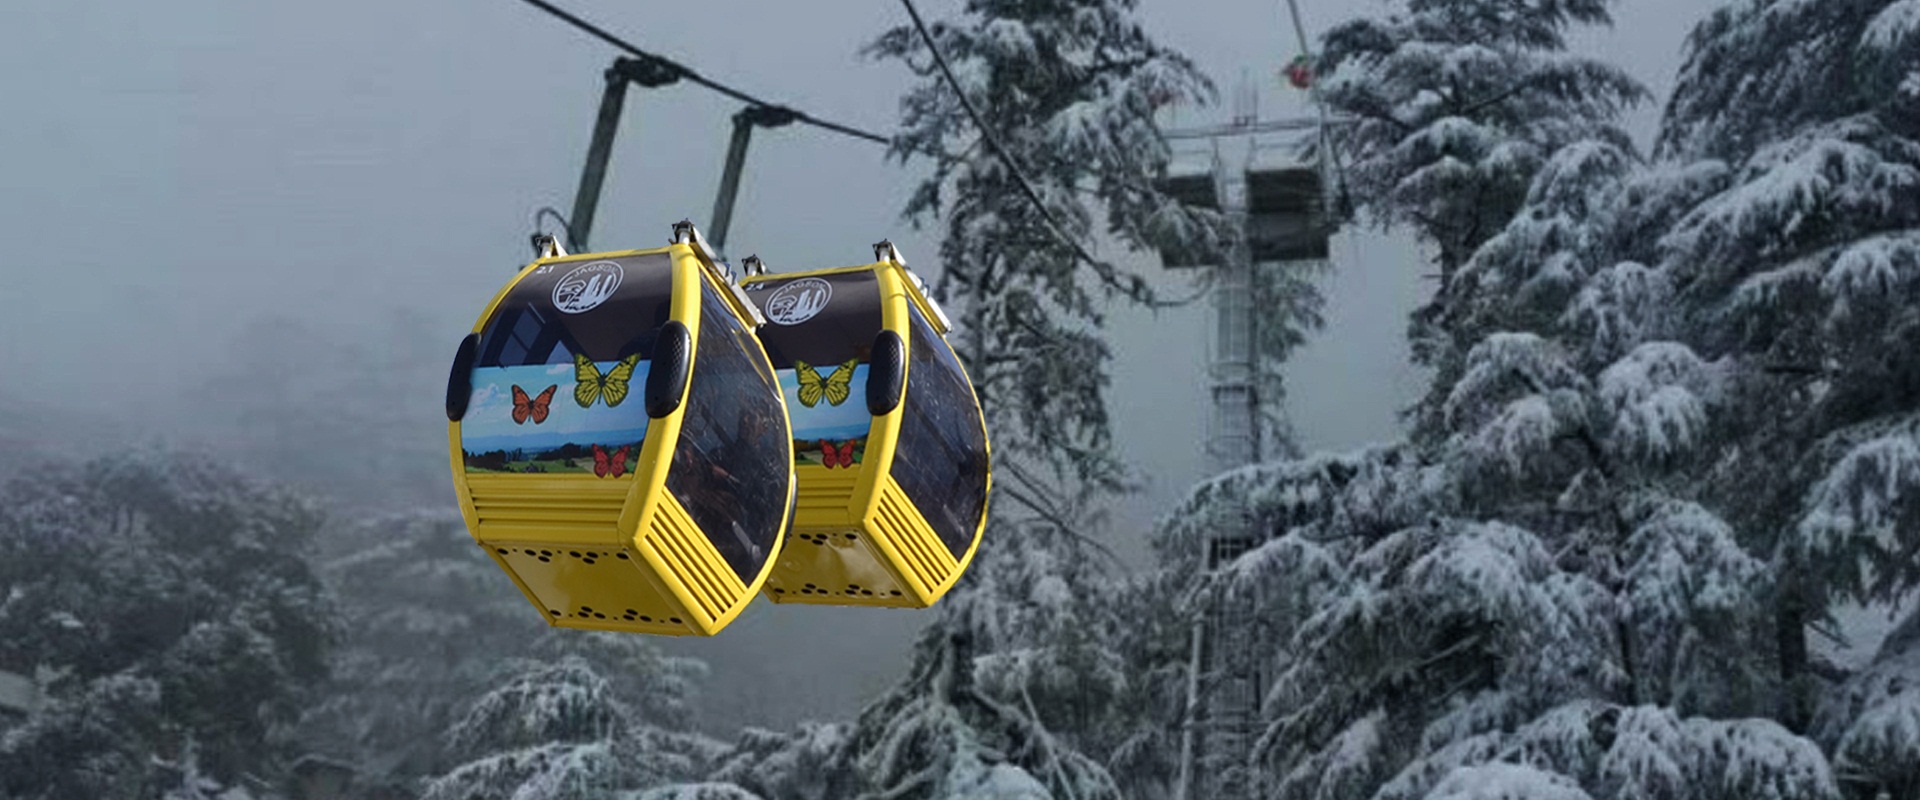 Reasons to love the Ropeway Ride